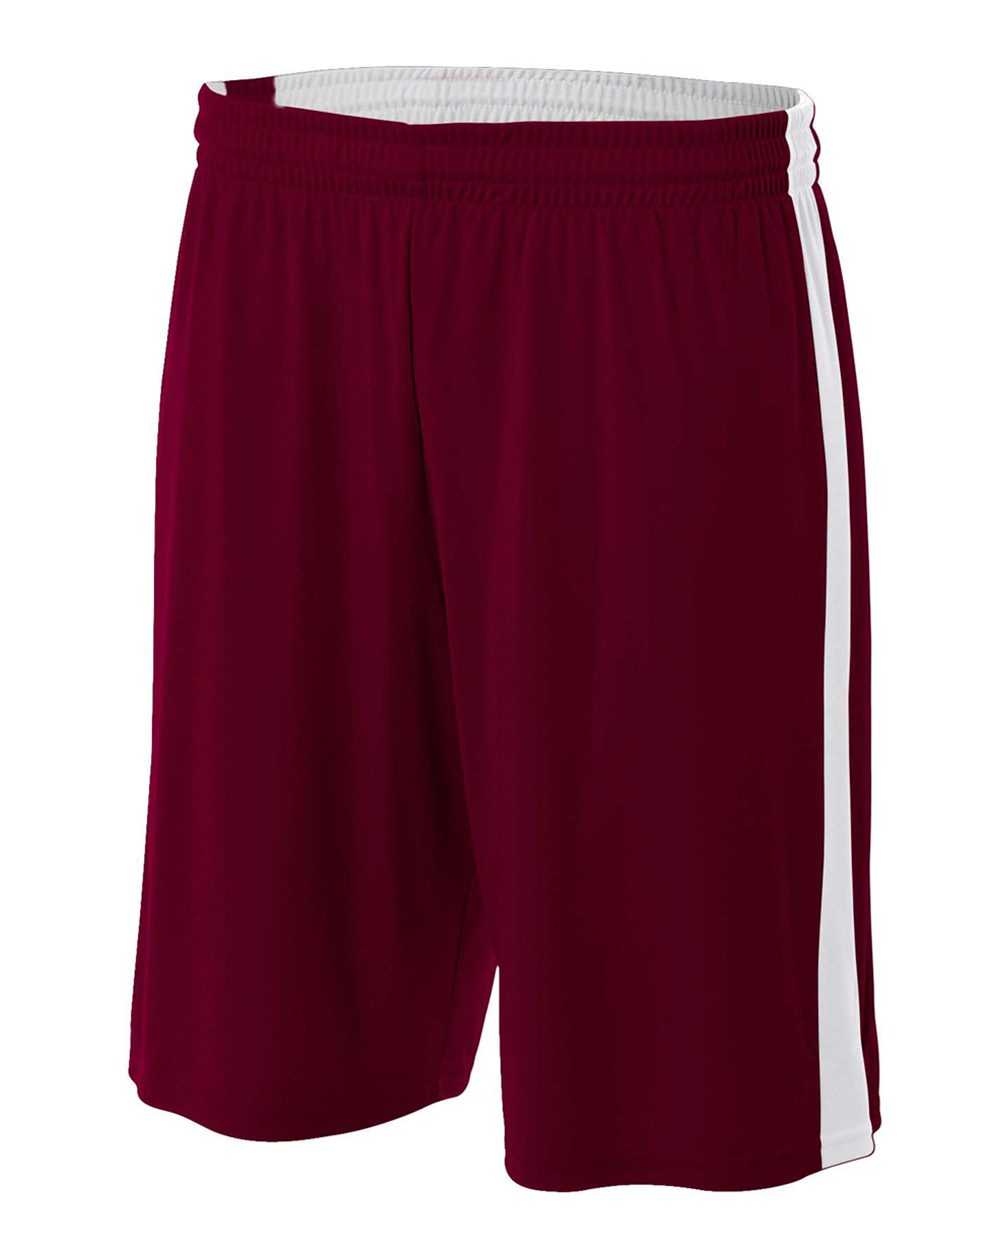 A4 NB5284 Youth Reversible Moisture Management 8" Short - Maroon White - HIT a Double